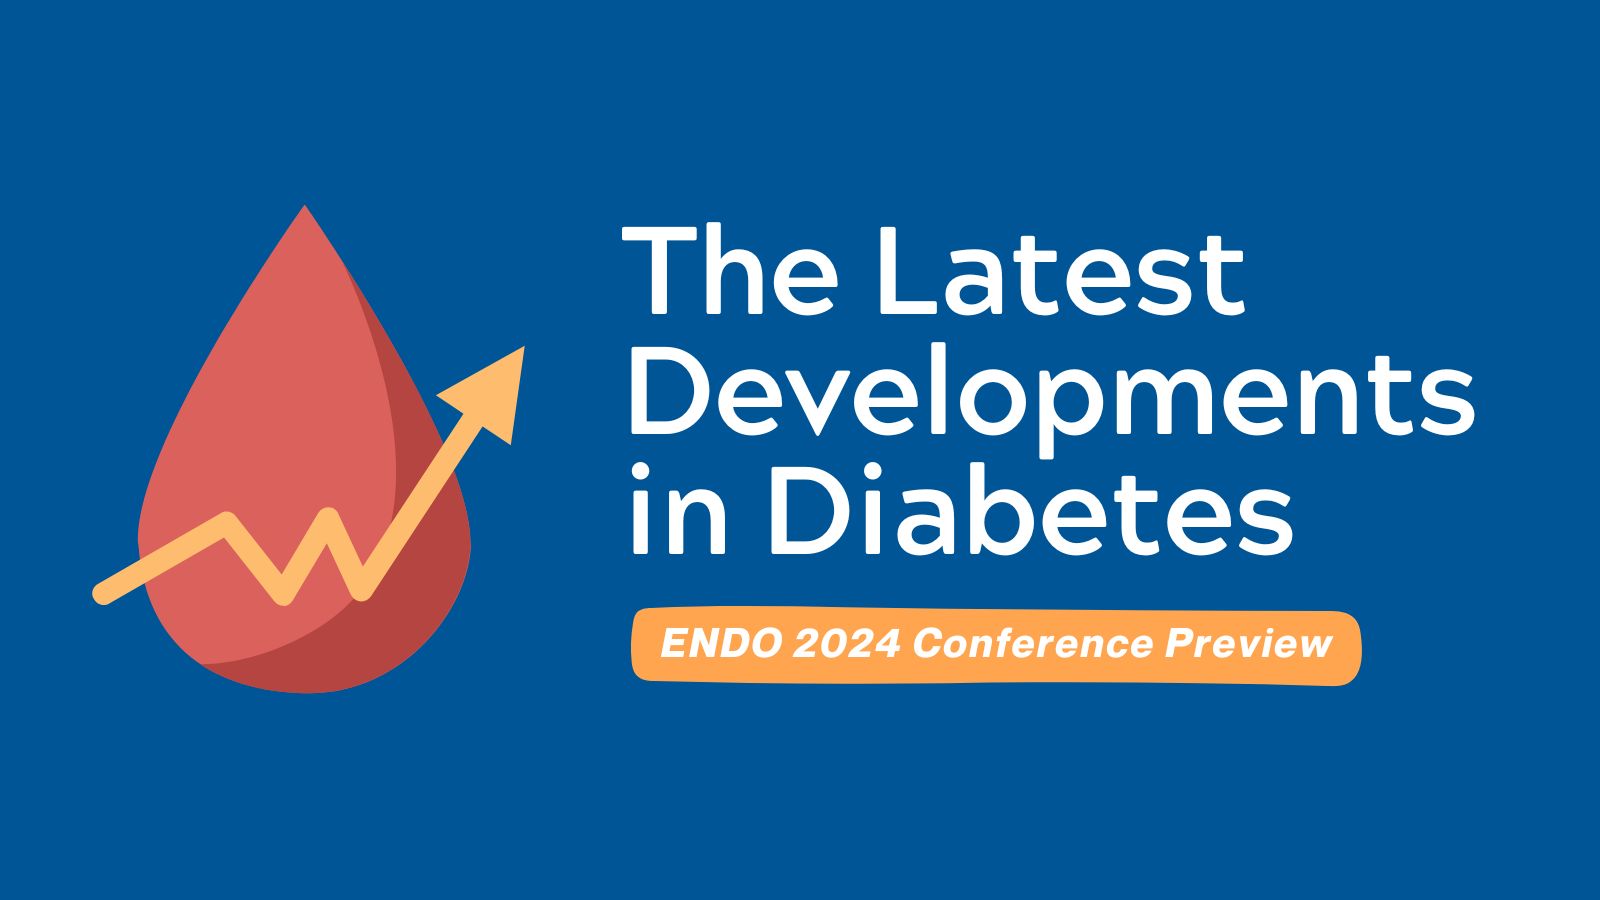 ENDO 2024 Conference Preview